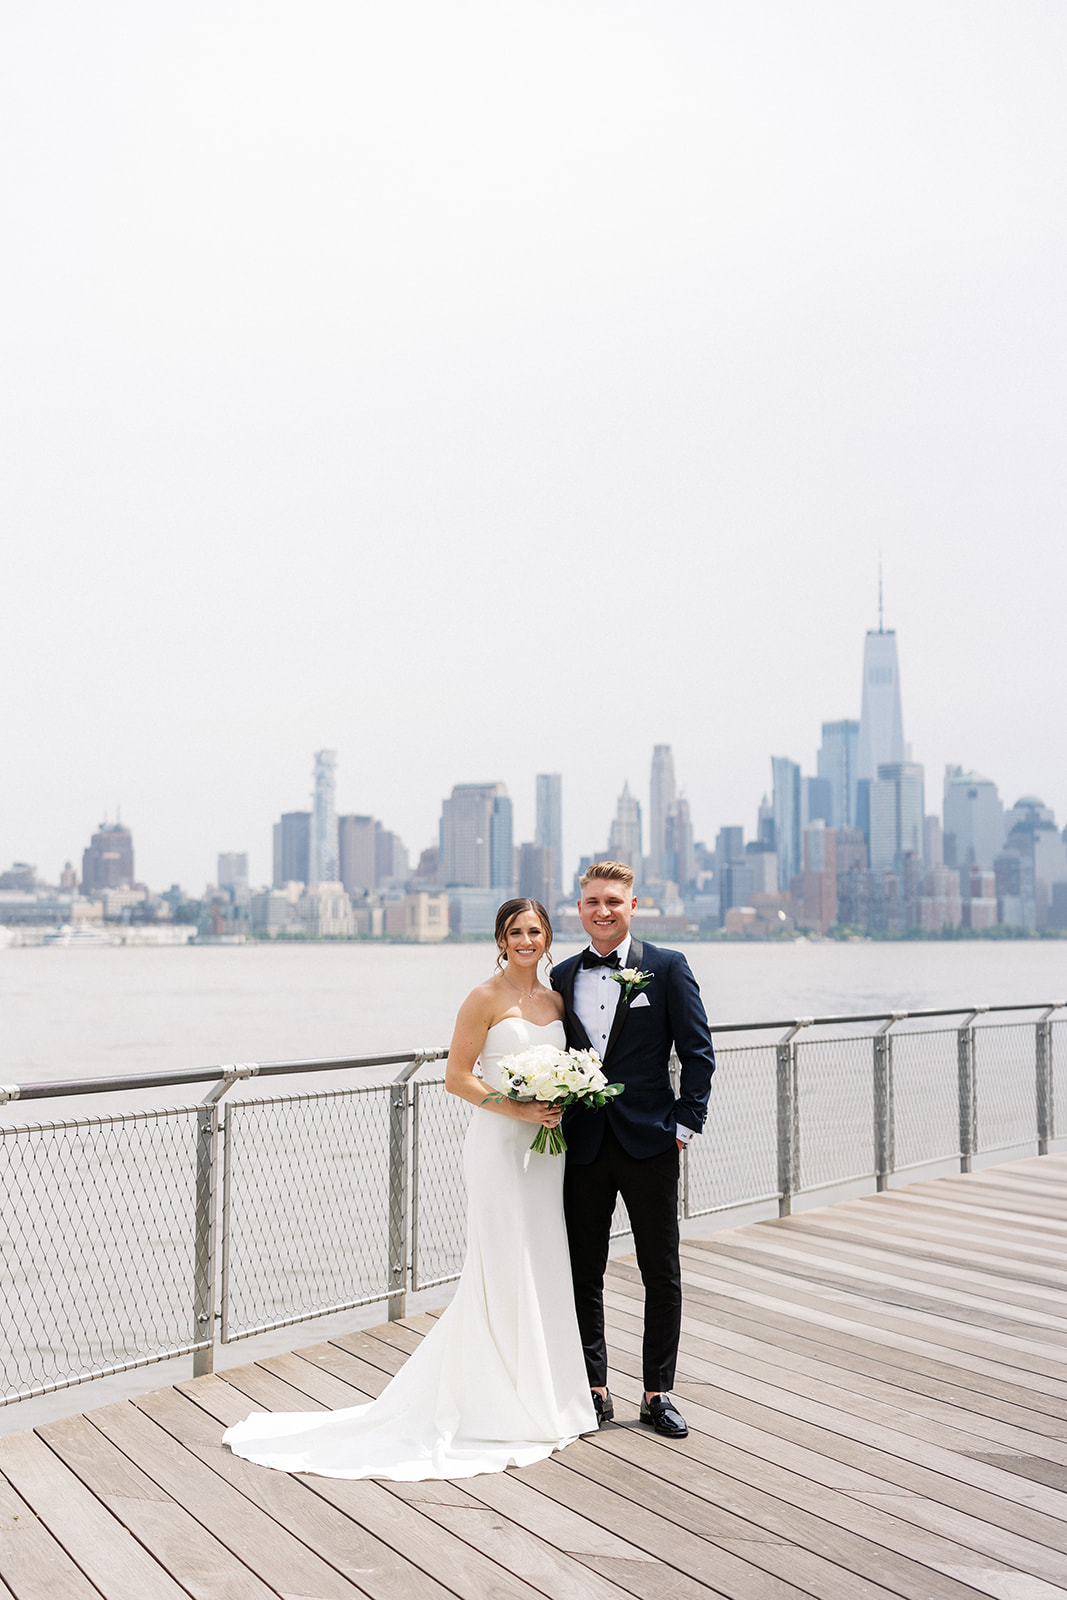 Newlyweds stand on a lakefront park boardwalk with at New Jersey Waterfront Wedding Venues with manhattan skyline across the river